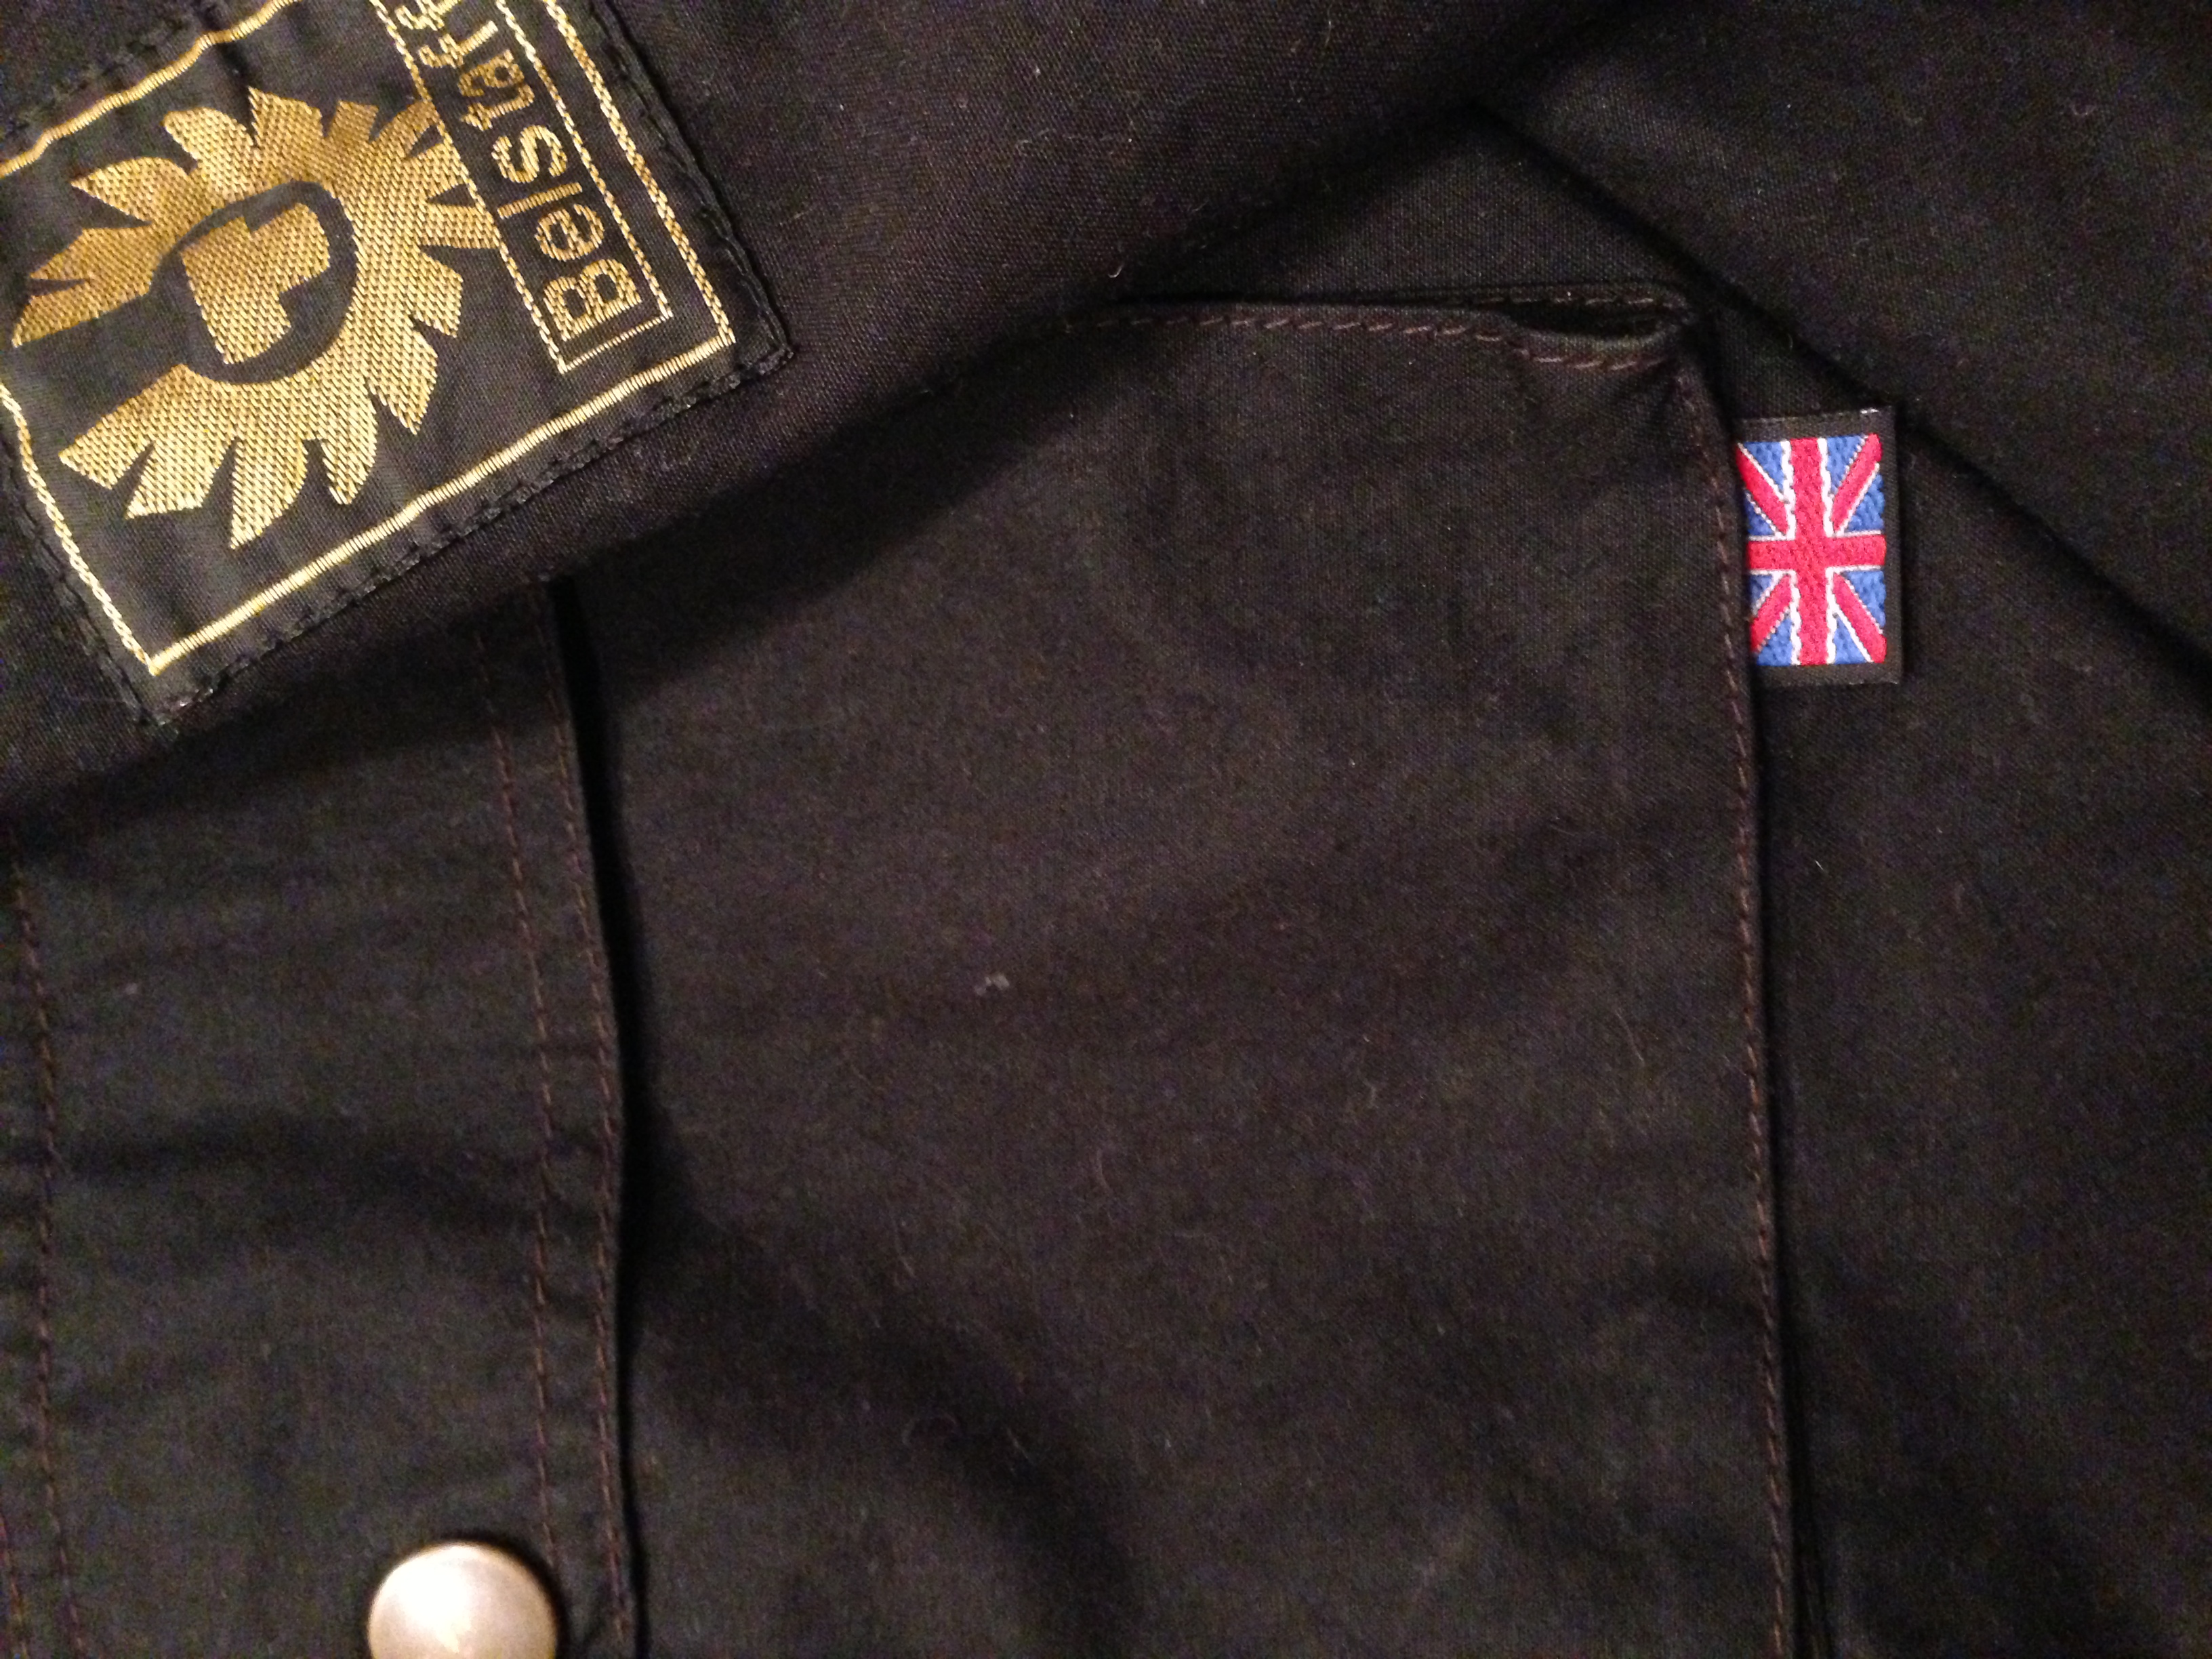 Another Belstaff "real or fake" tread | Styleforum